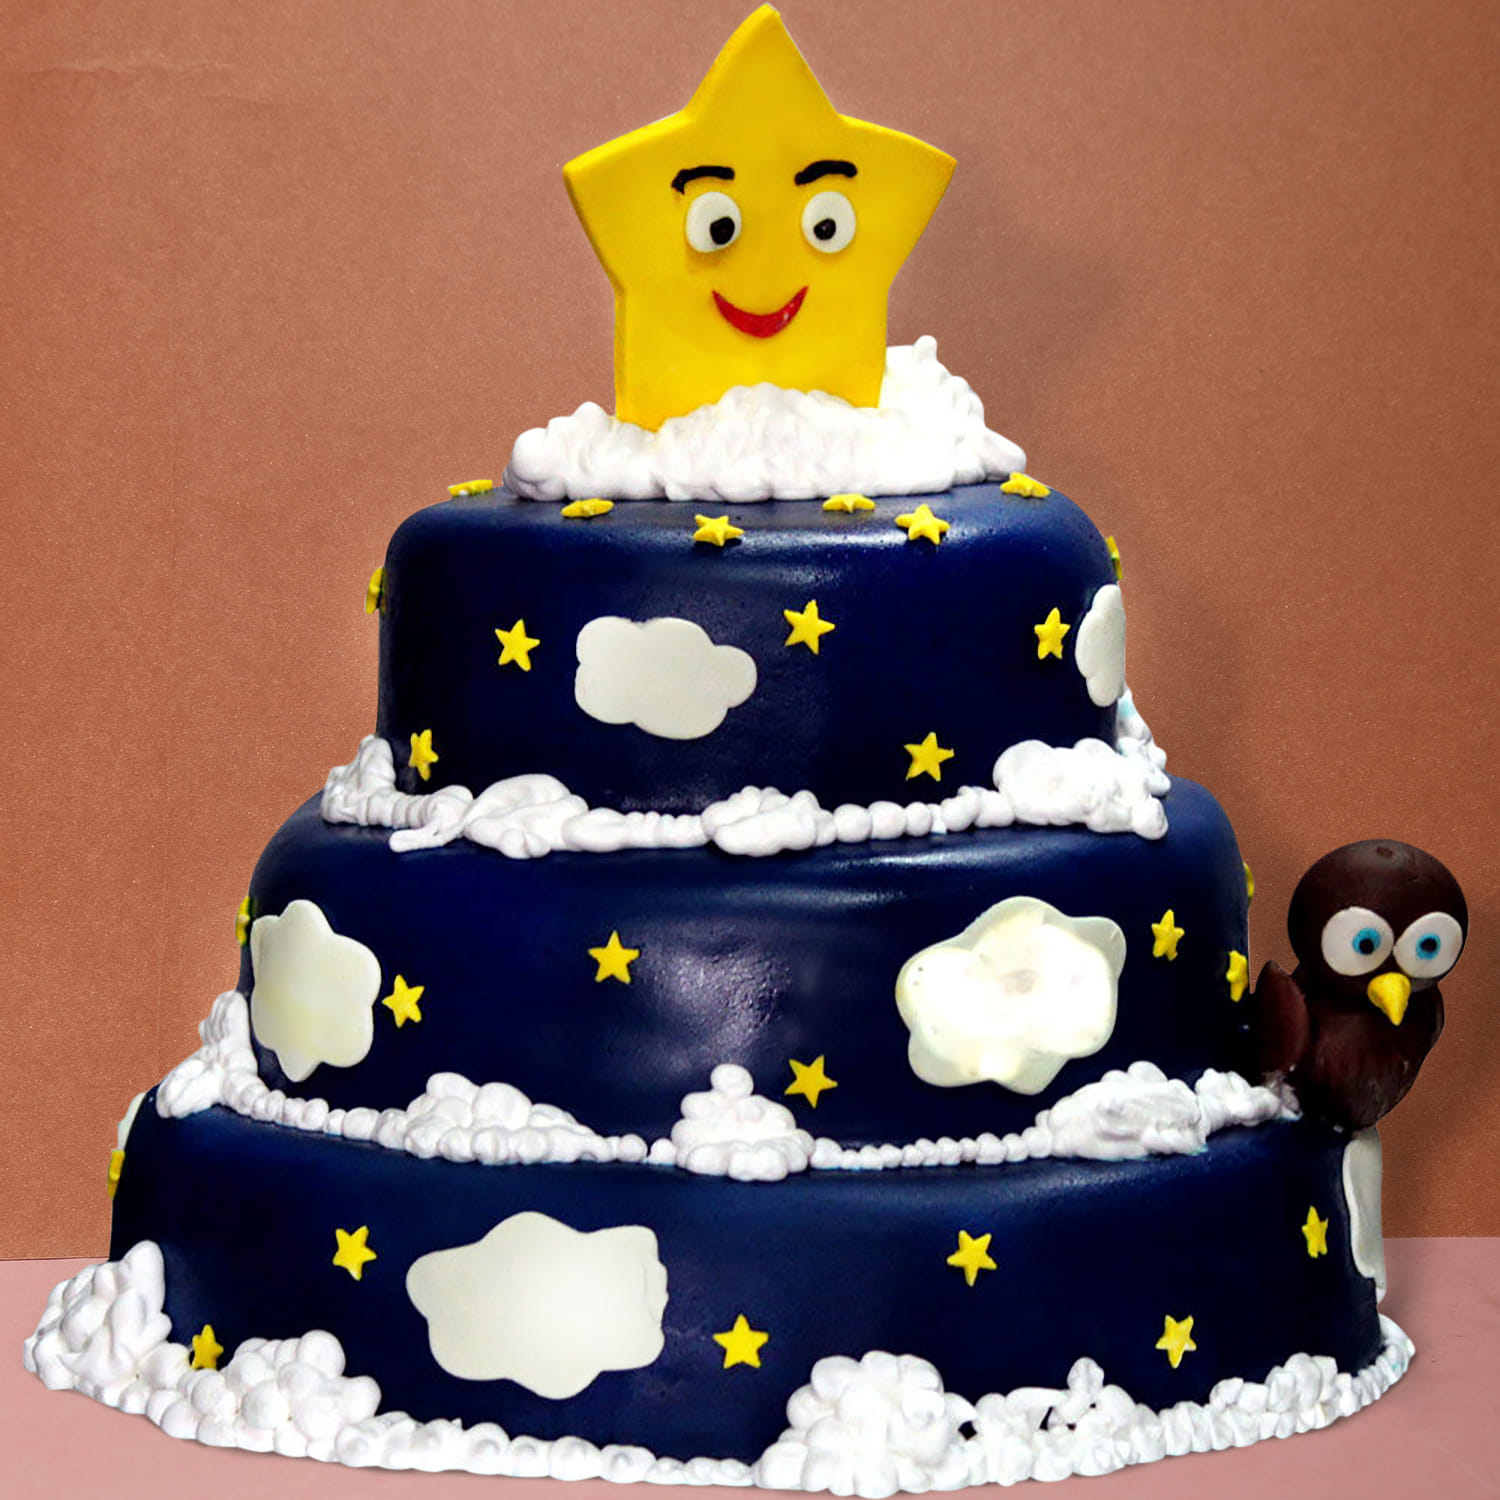 Cloud & Stars Baby Shower Cake Delivery in Delhi NCR - ₹4,499.00 Cake  Express